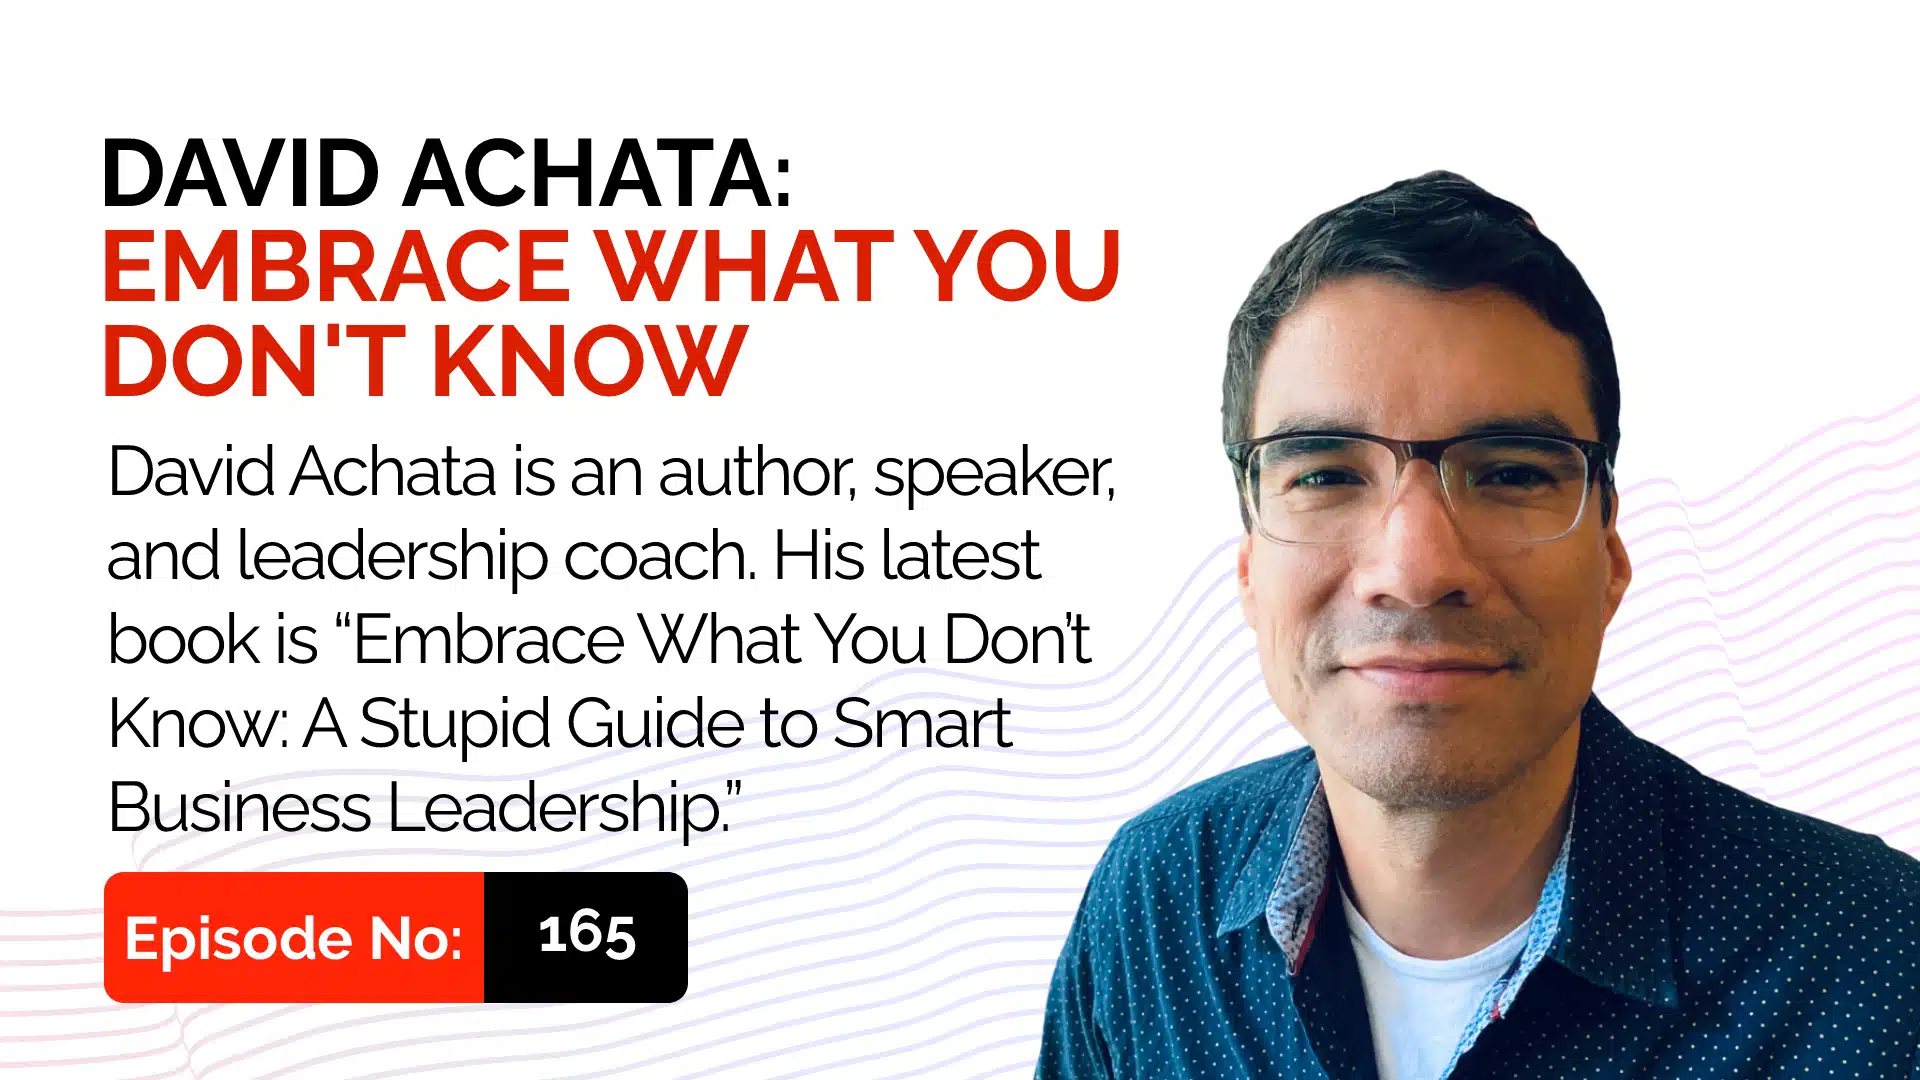 david achata embrace what you don't know